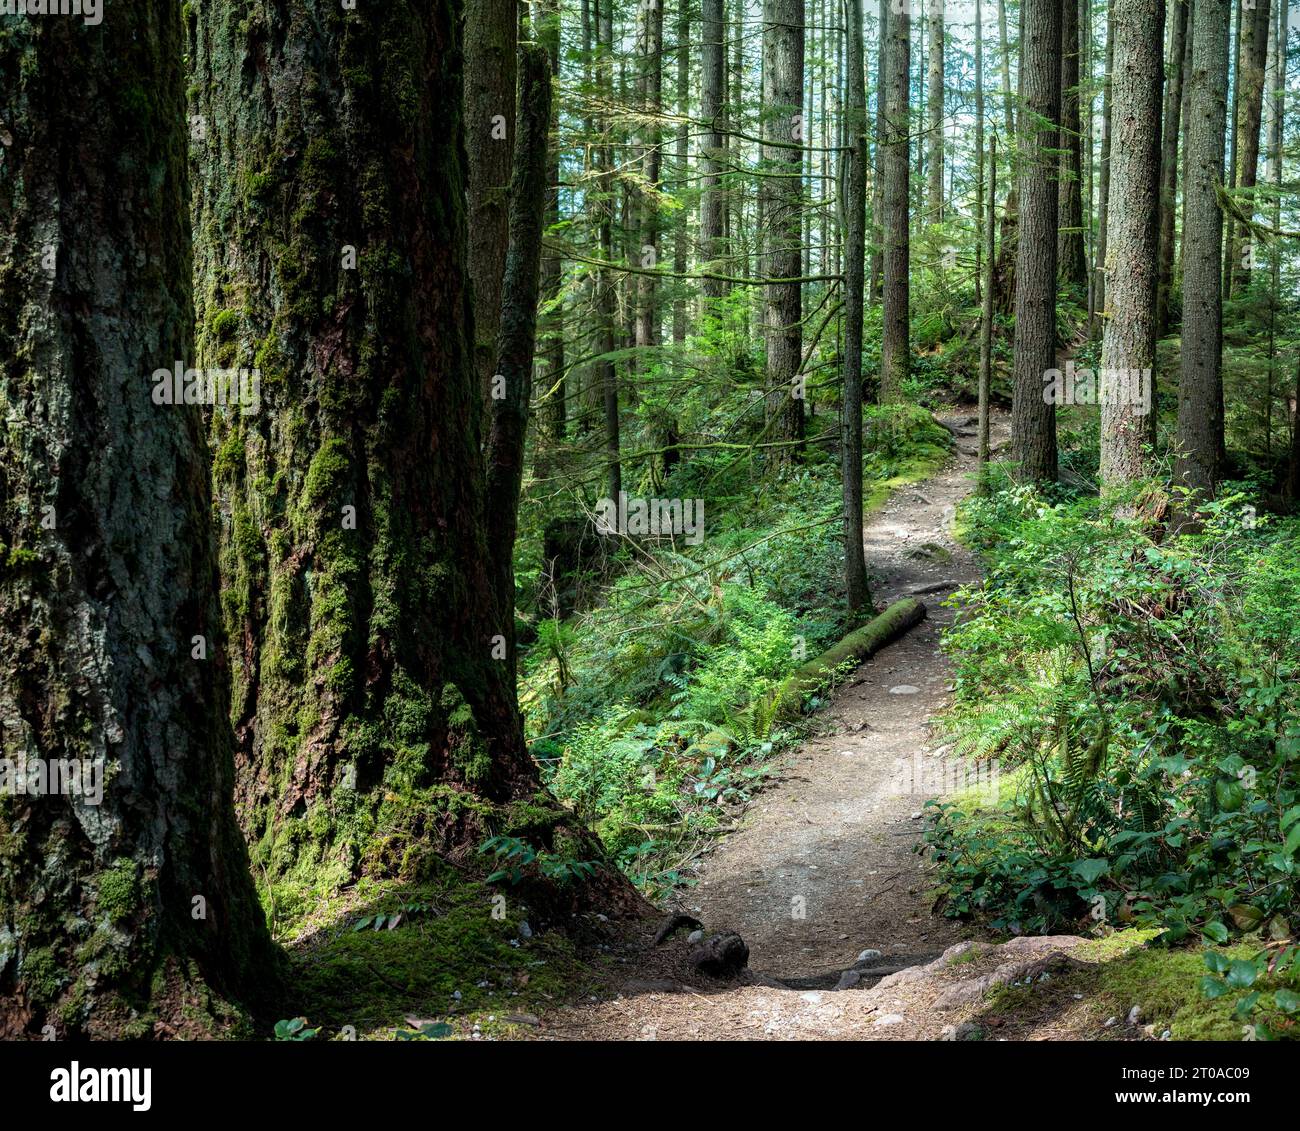 Narrow hiking trail or footpath in forest. Lush green pacific northwest rainforest scenery in summer with tall trees and bushes. Hiking or biking trai Stock Photo